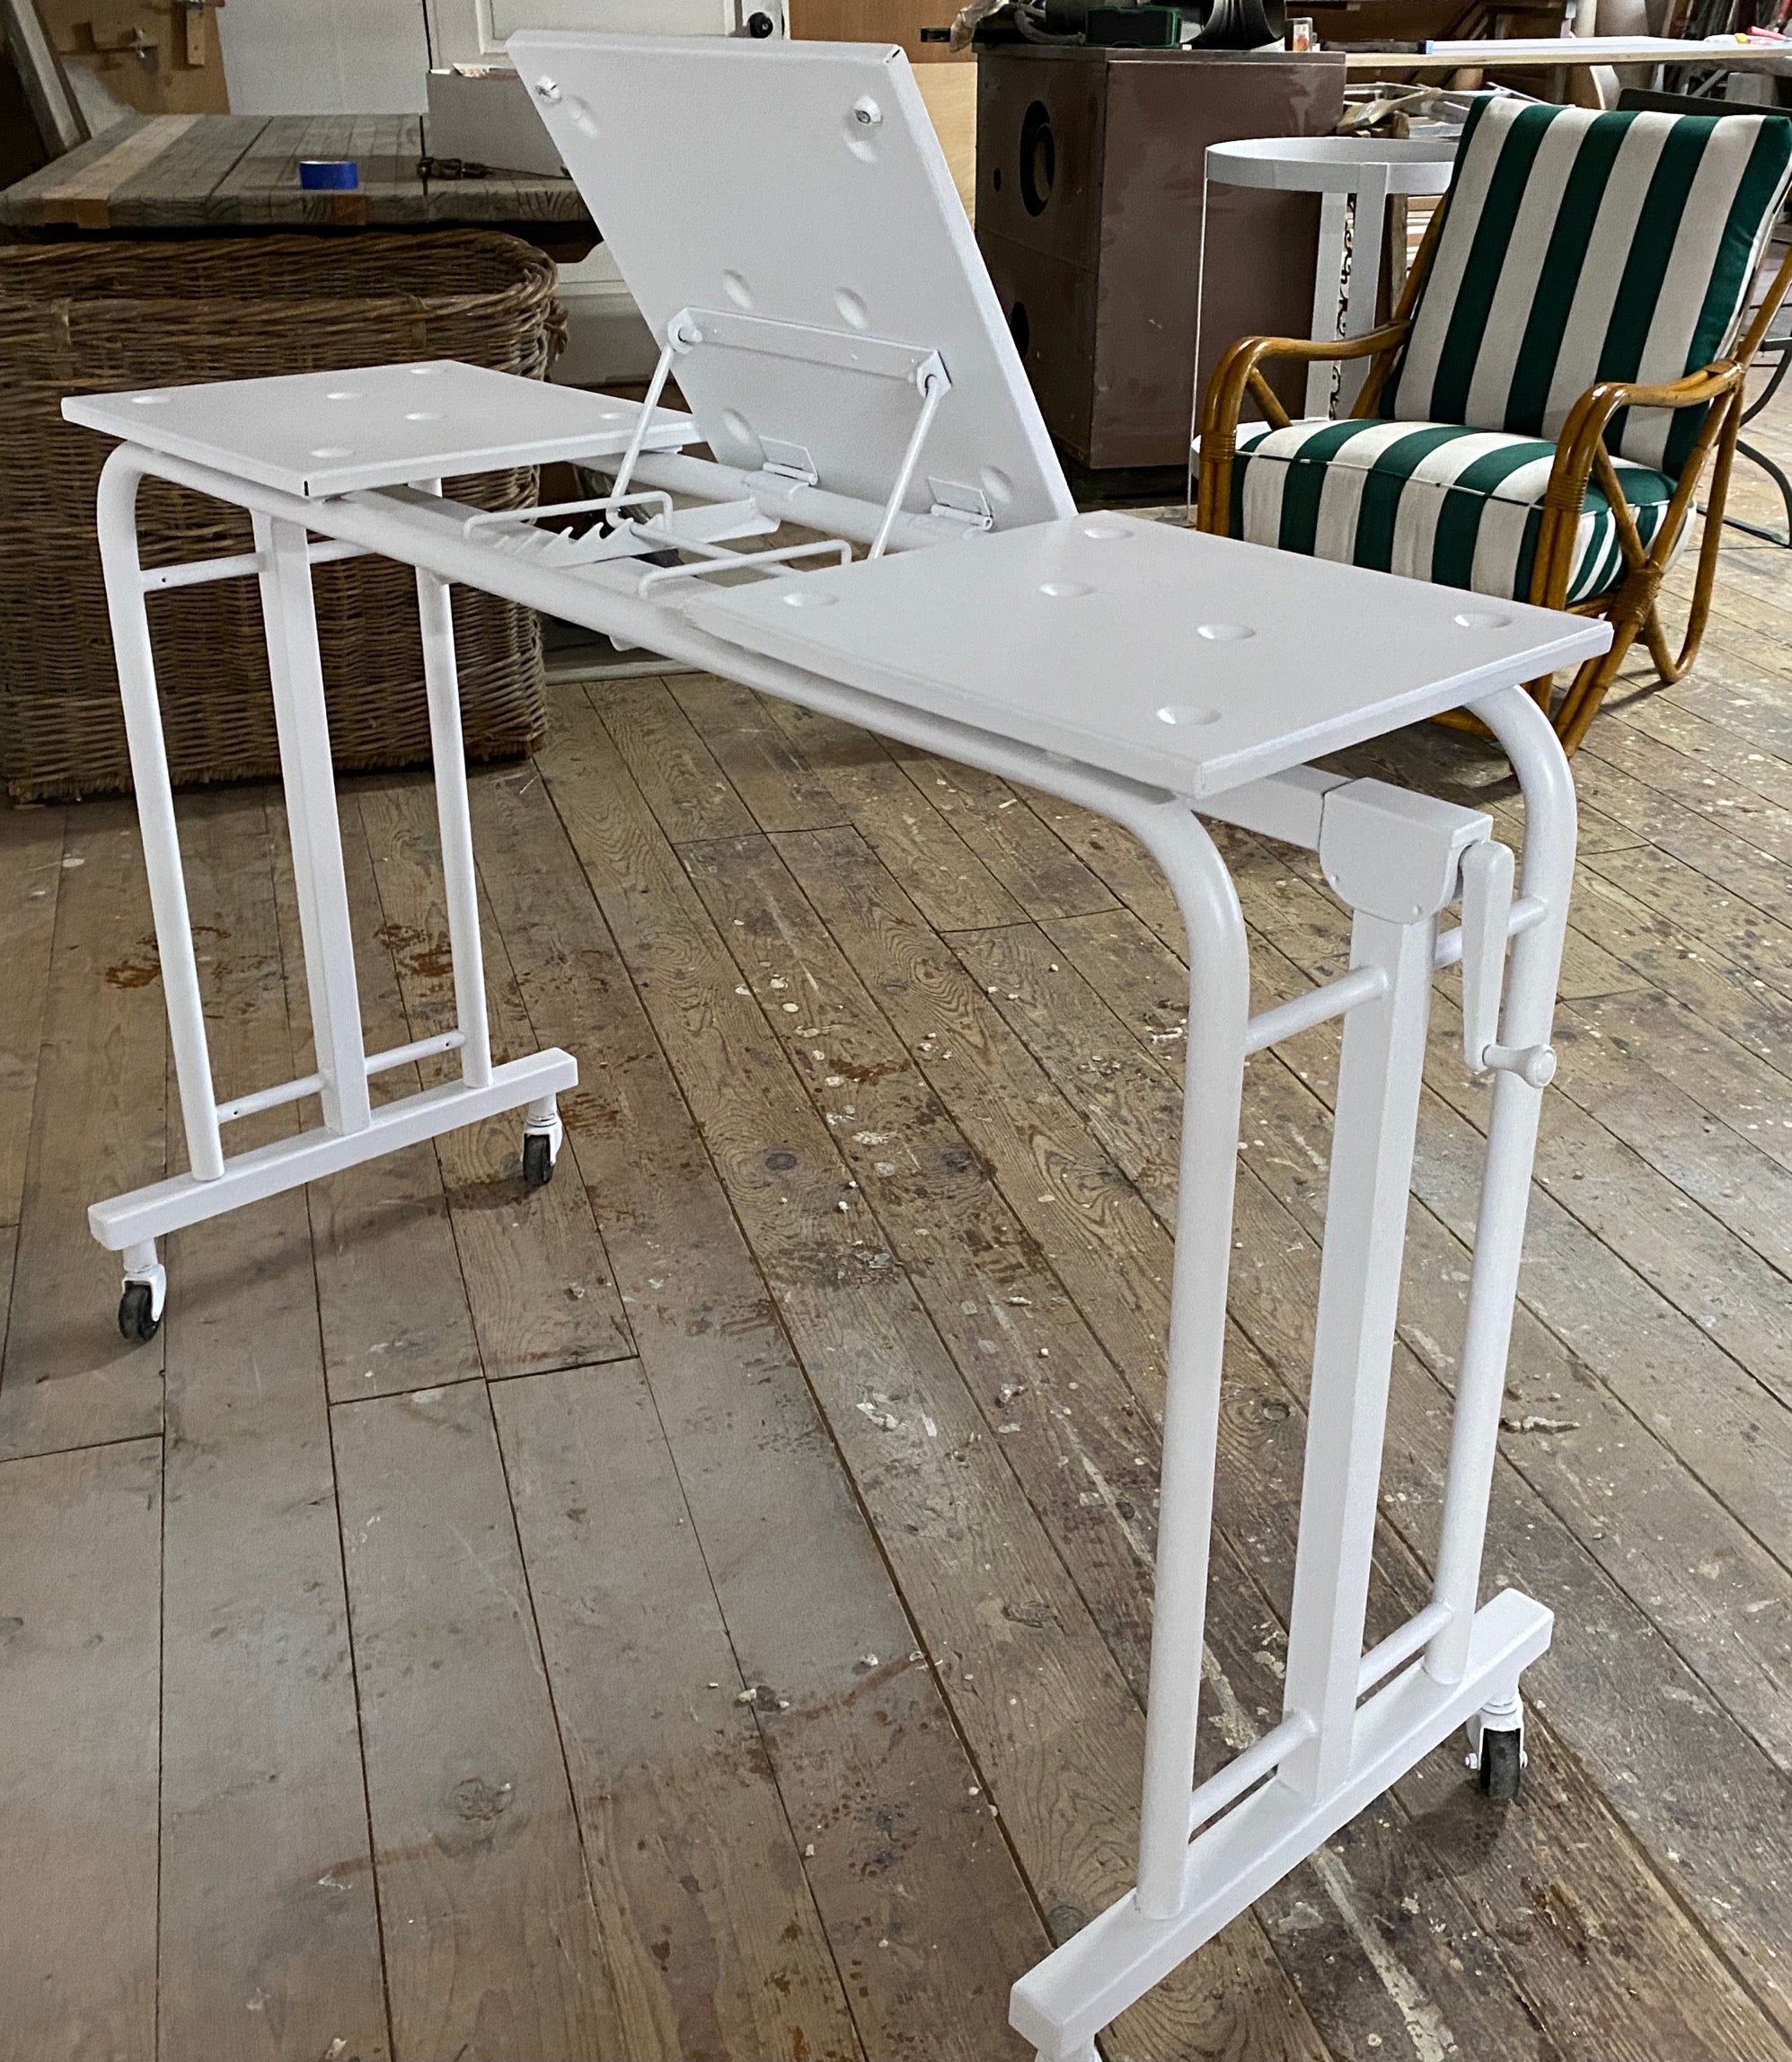 A rare arc deco style hospital overbed table. This table is multifunctional. Use it for mobile laptop cart, computer or a rolling desk dart. Or use it for its original purpose, a hospital bed table for someone who is convalescing. Also great as a